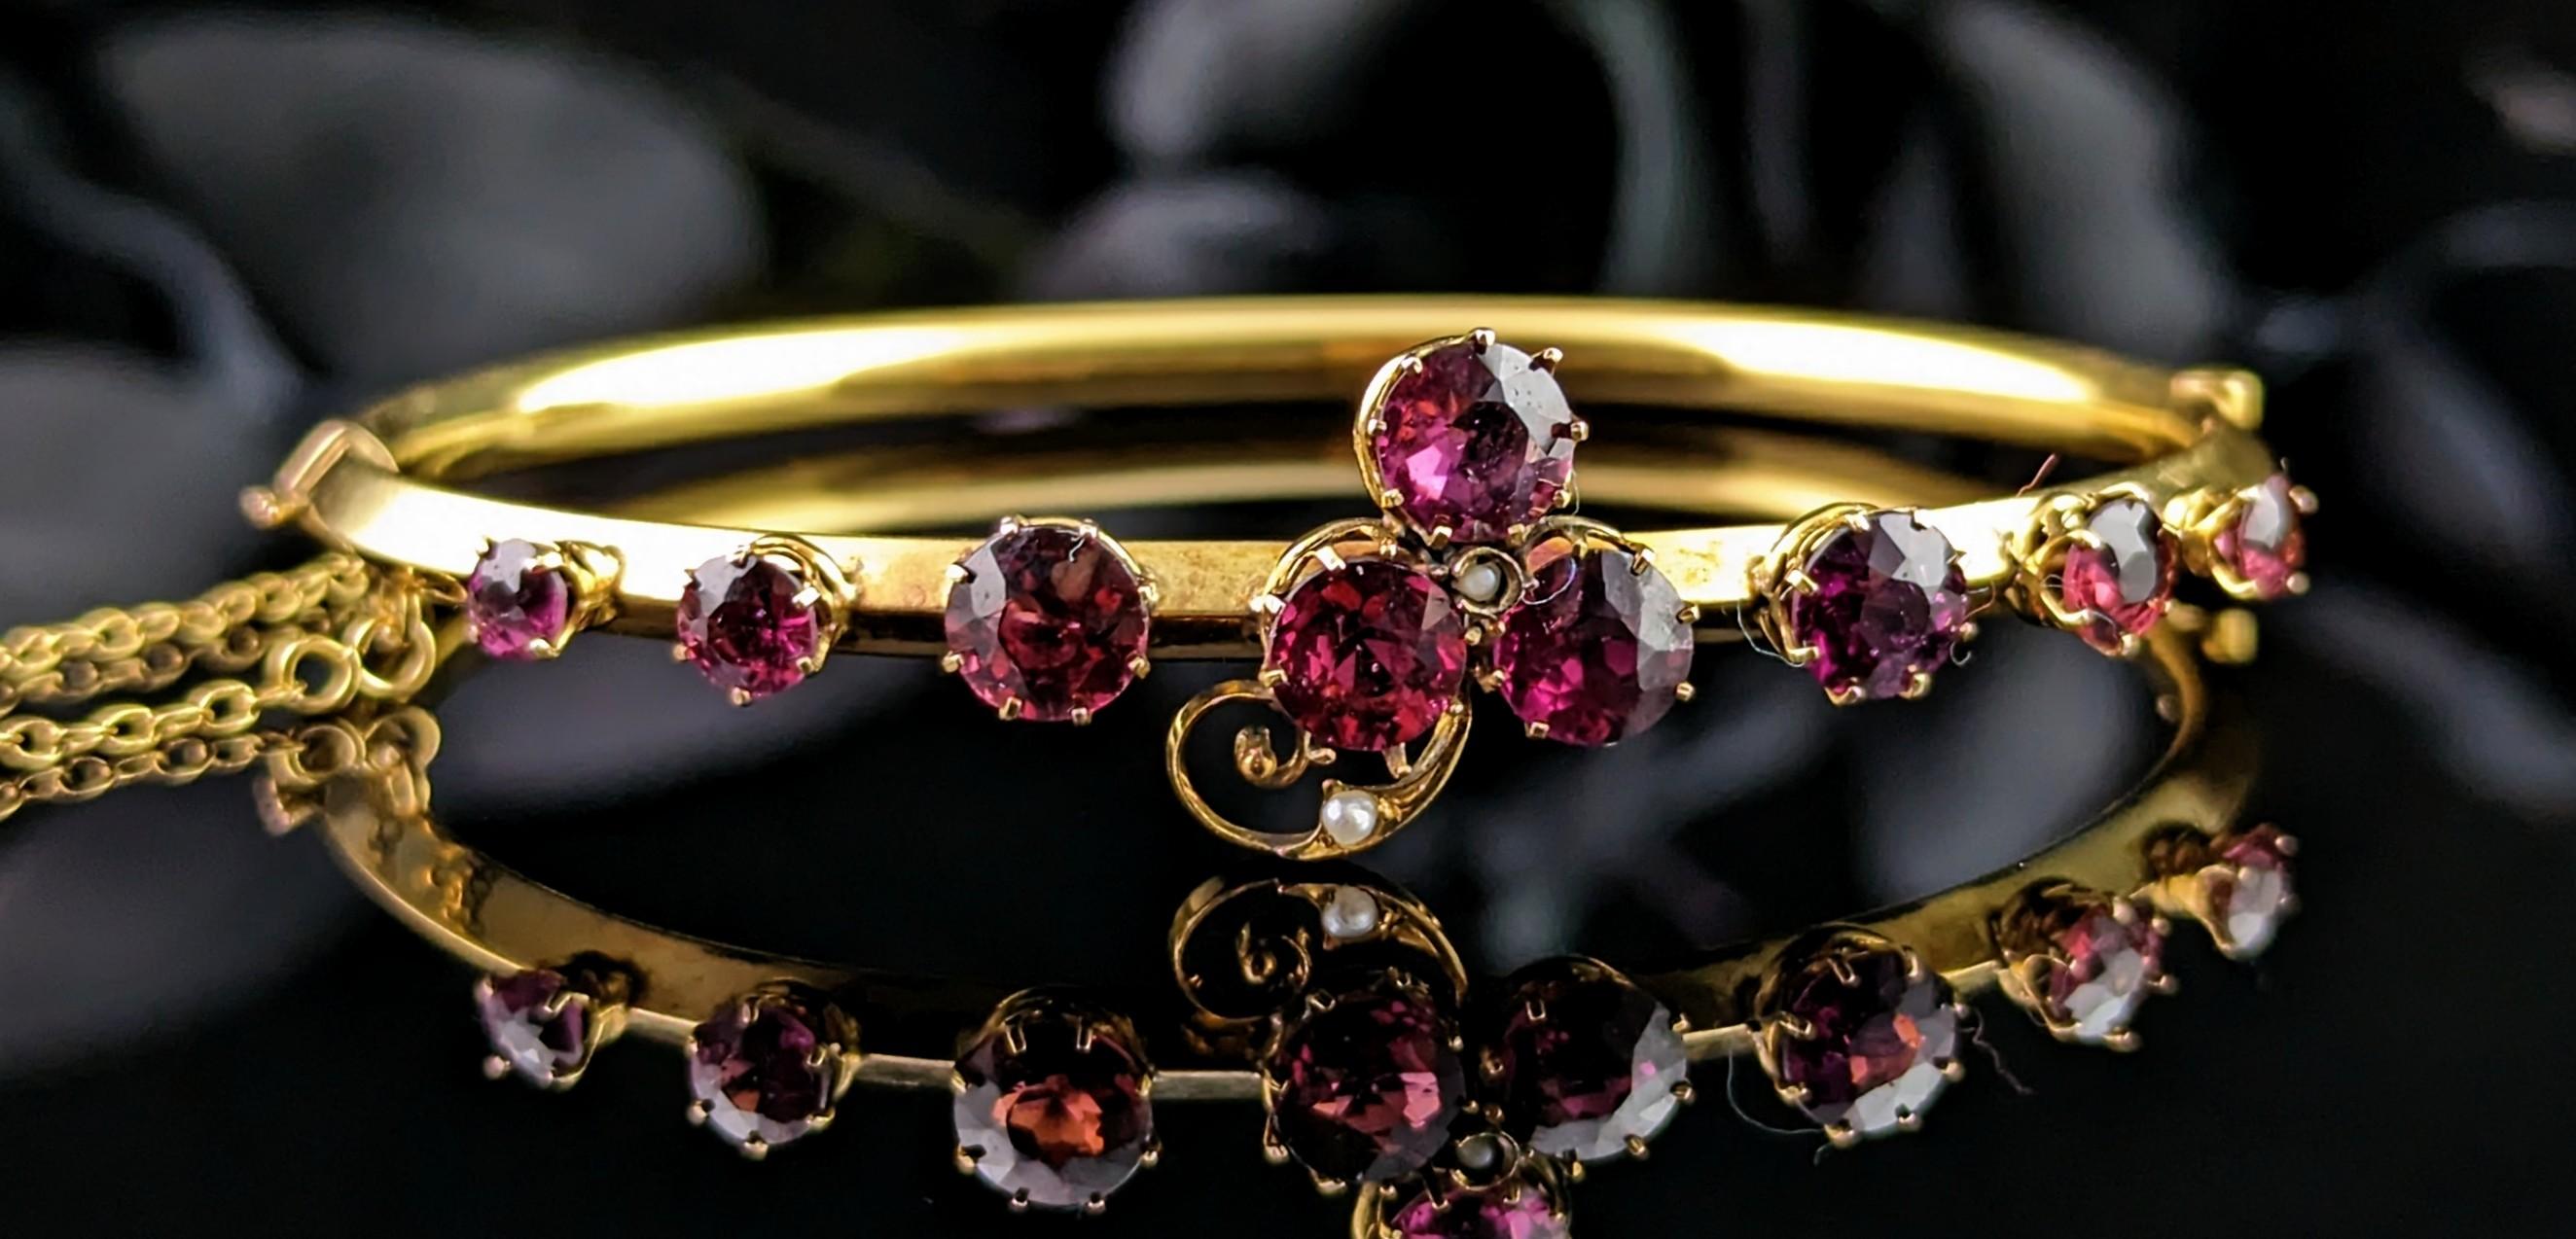 This stunning antique Shamrock bangle is a real beauty!

The combination of the rich purple toned Almandine garnets with the rich bloomed 9kt yellow gold gives the piece an instant luxurious feel.

It is crafted in the richest 9kt yellow gold with a